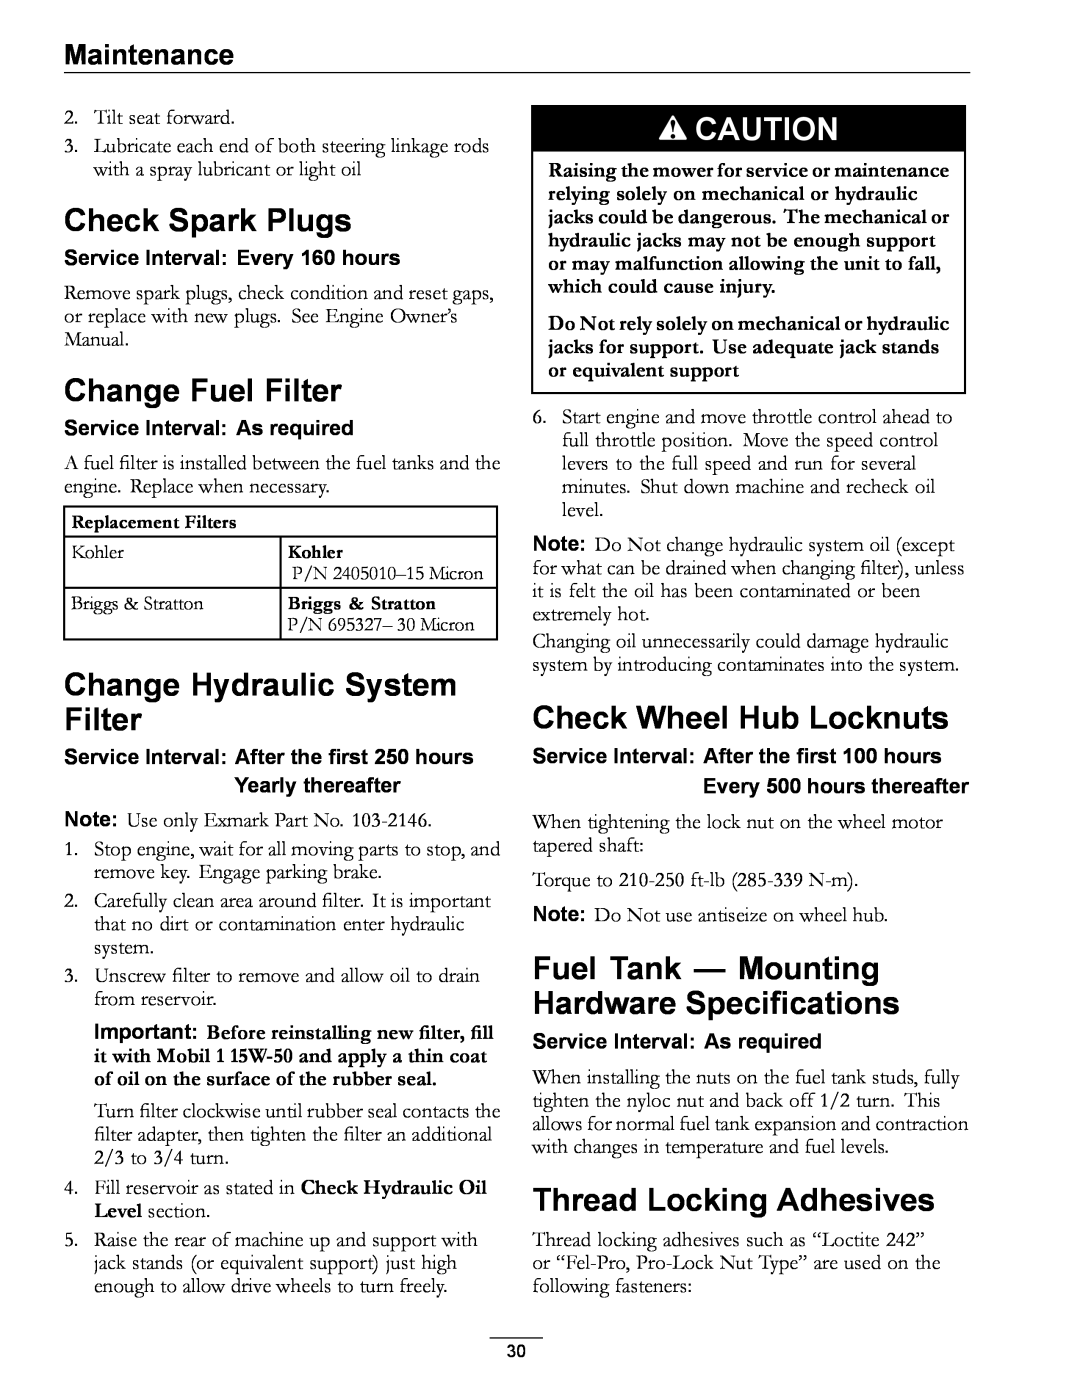 Exmark 720000 & Higher Check Spark Plugs, Change Fuel Filter, Change Hydraulic System Filter, Check Wheel Hub Locknuts 